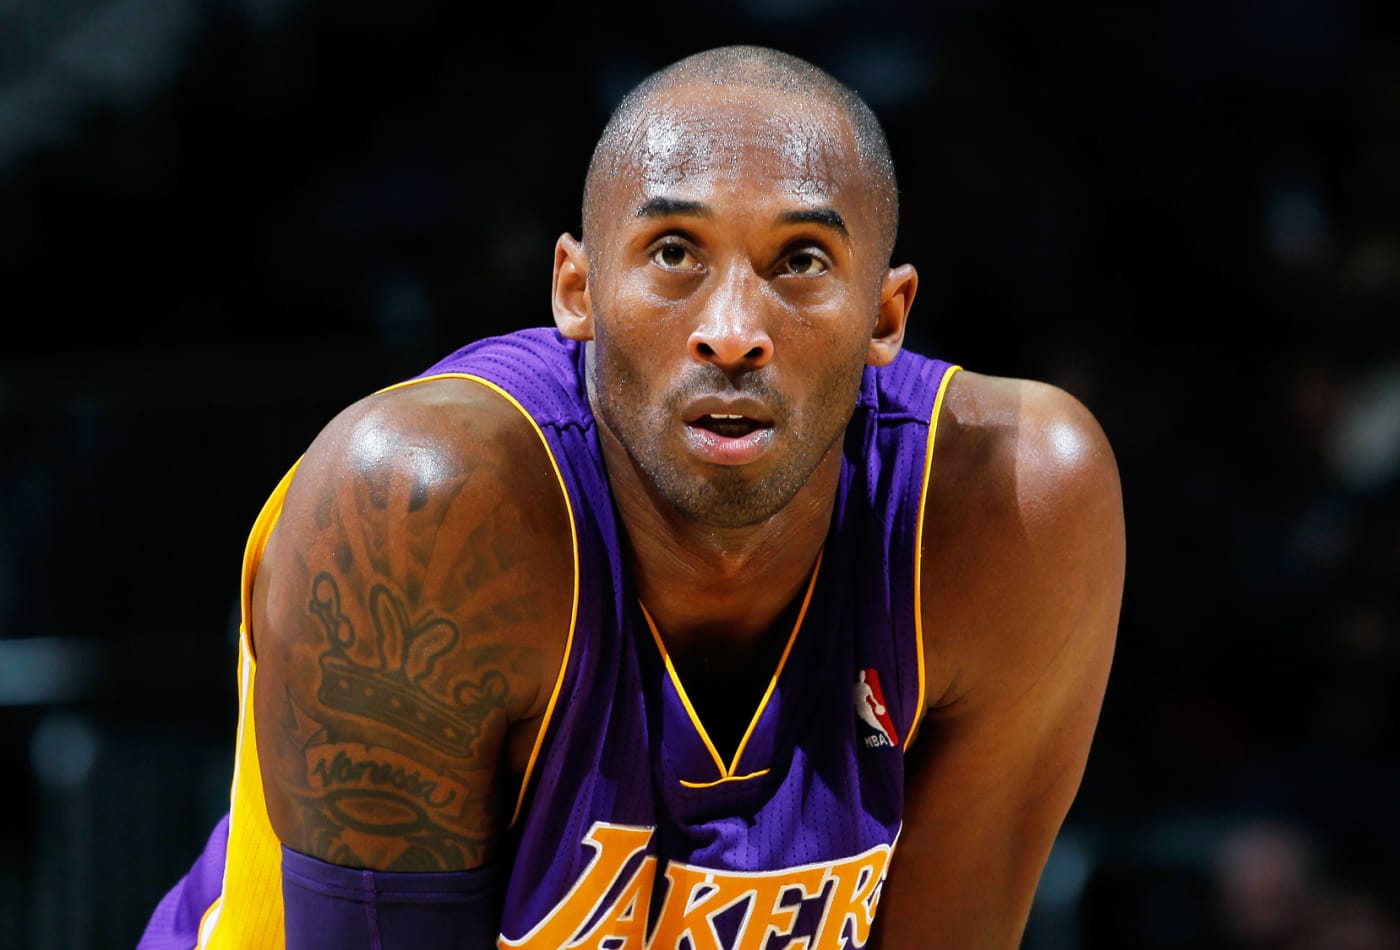 kobe bryant secretly spent the day with a terminally ill fan